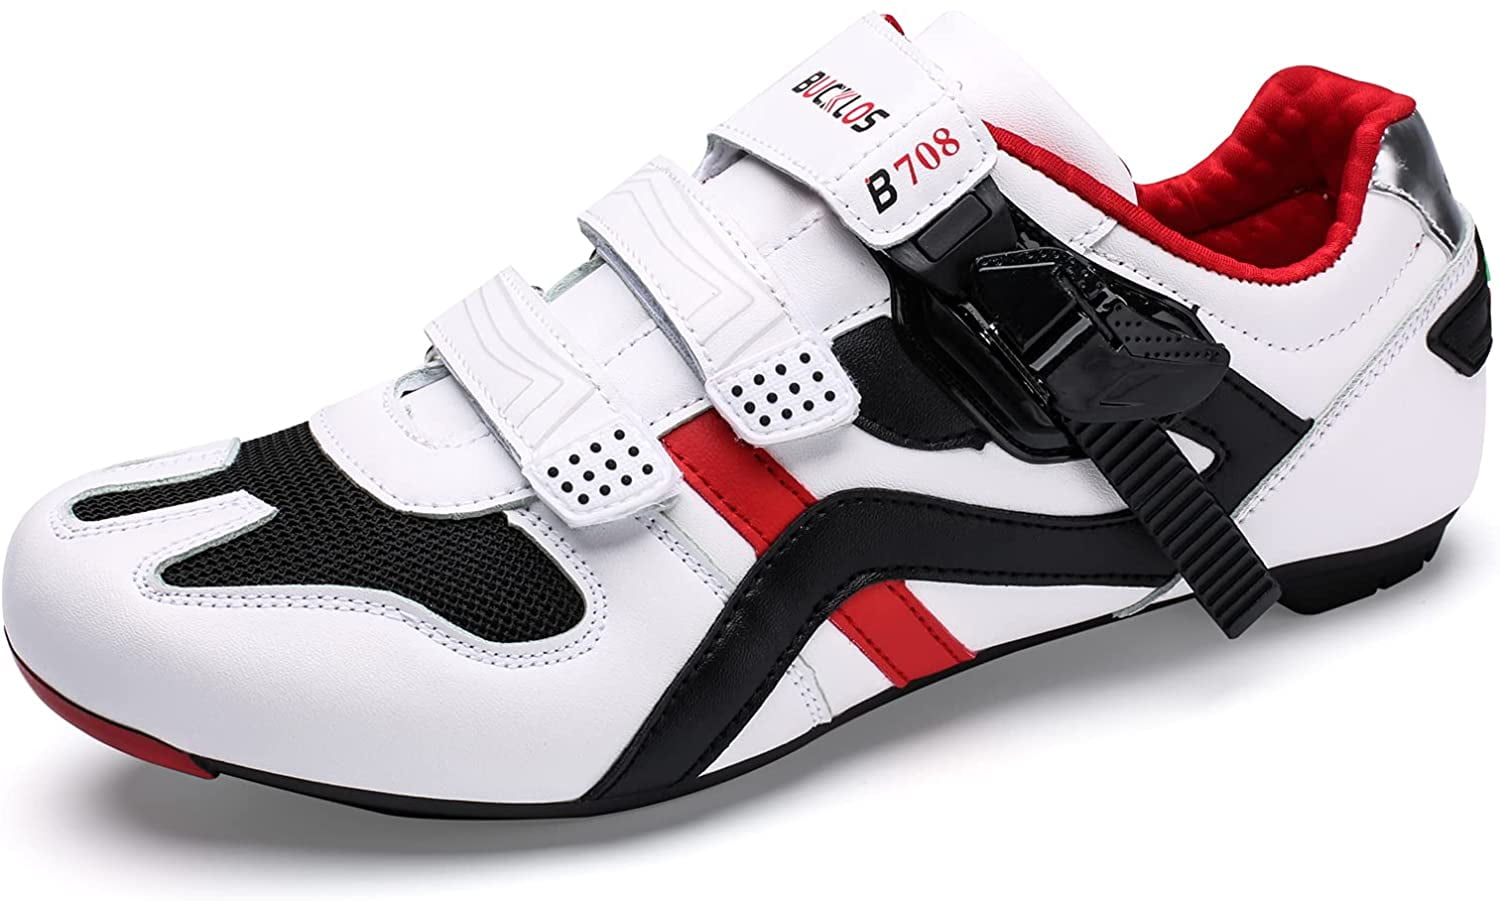 Cycling Shoes Spin Shoestring with Compatible Cleat Peloton Shoe with SPD and Delta Lock Pedal Bike Shoes 